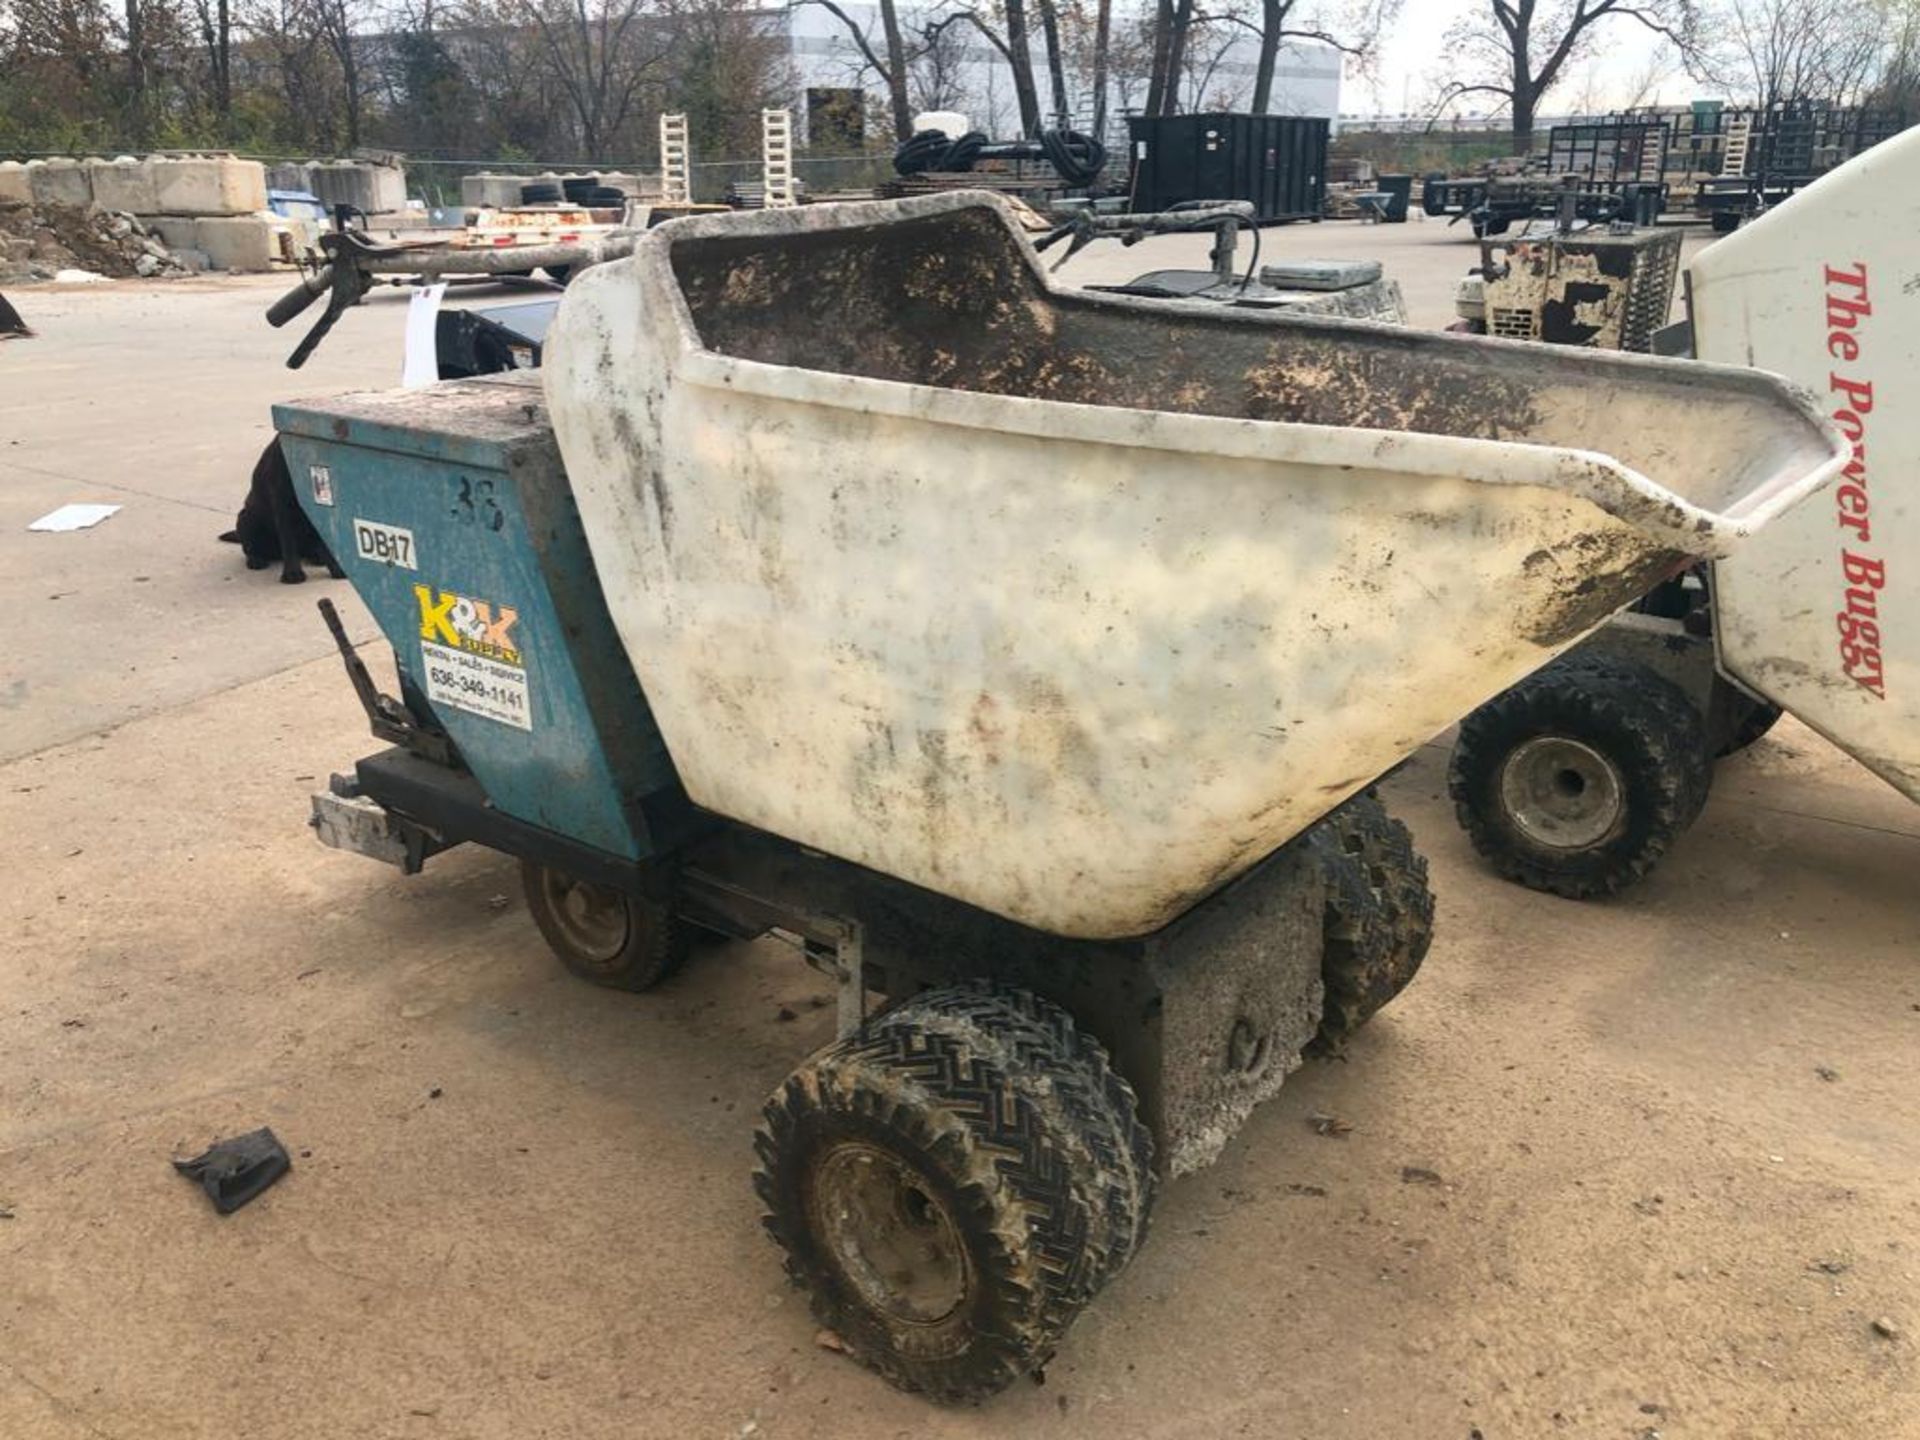 Bartell Morrison DB17P Concrete Buggy, Serial #129061, 17 Cubic Ft. Located in Hazelwood, MO